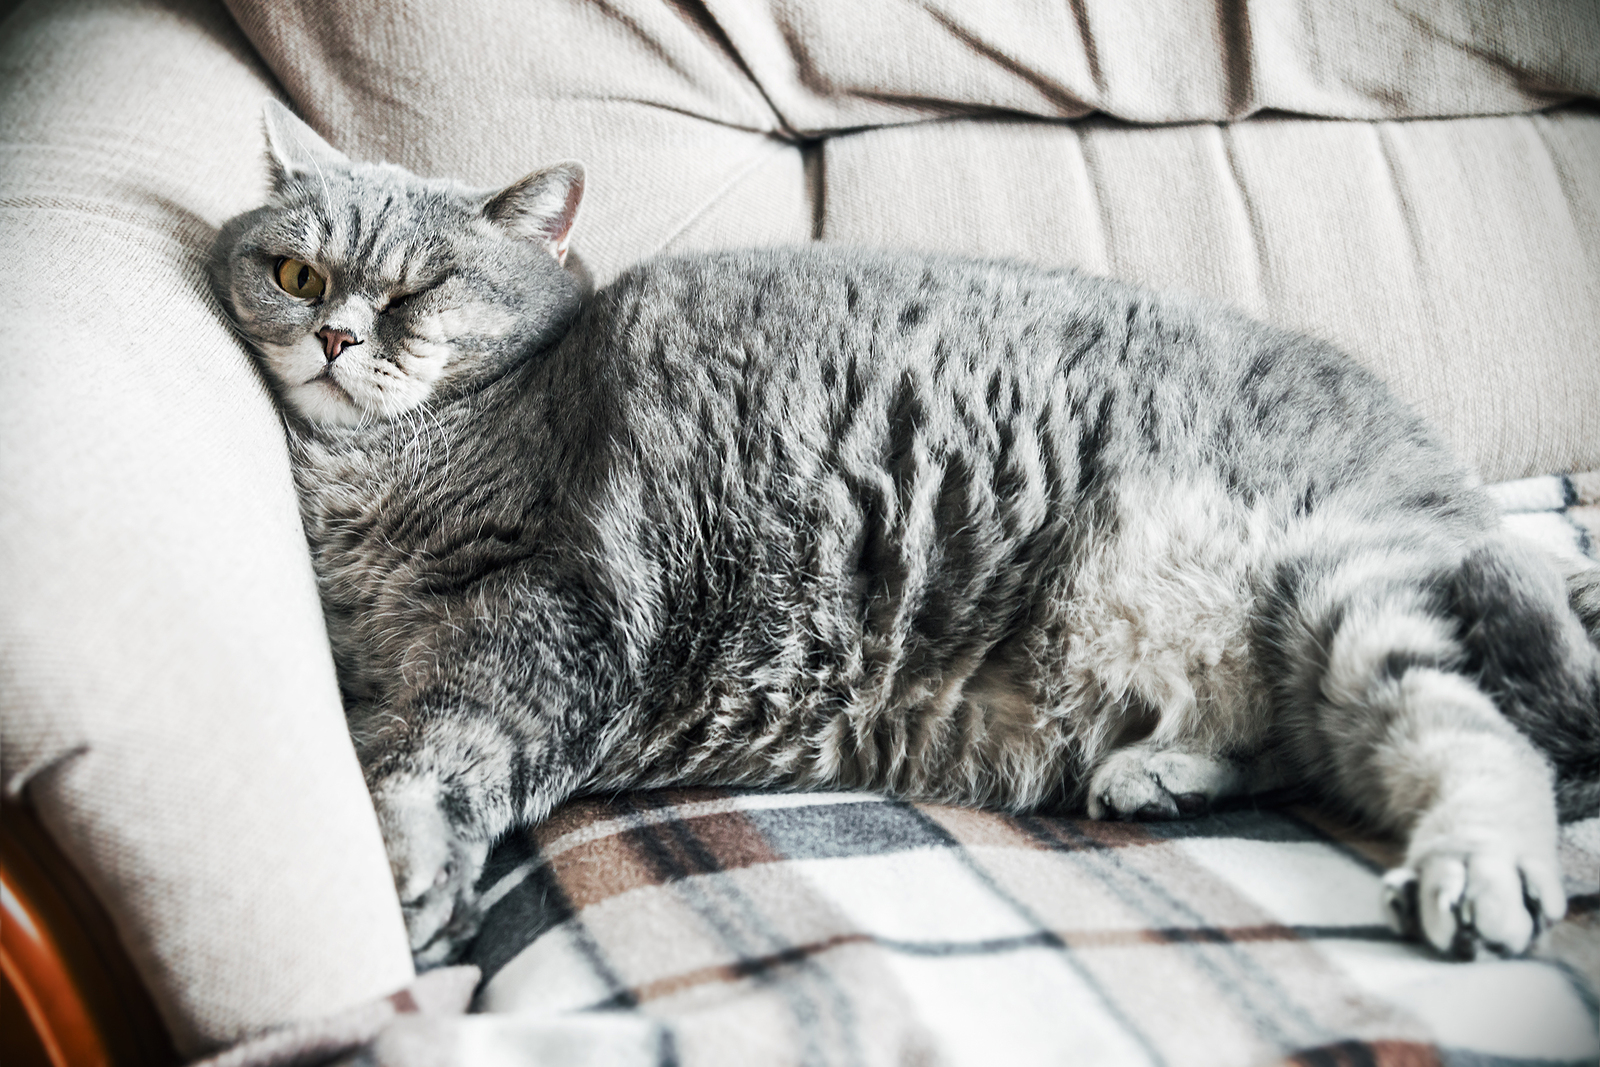 A picture of an overweight cat resting on a couch.